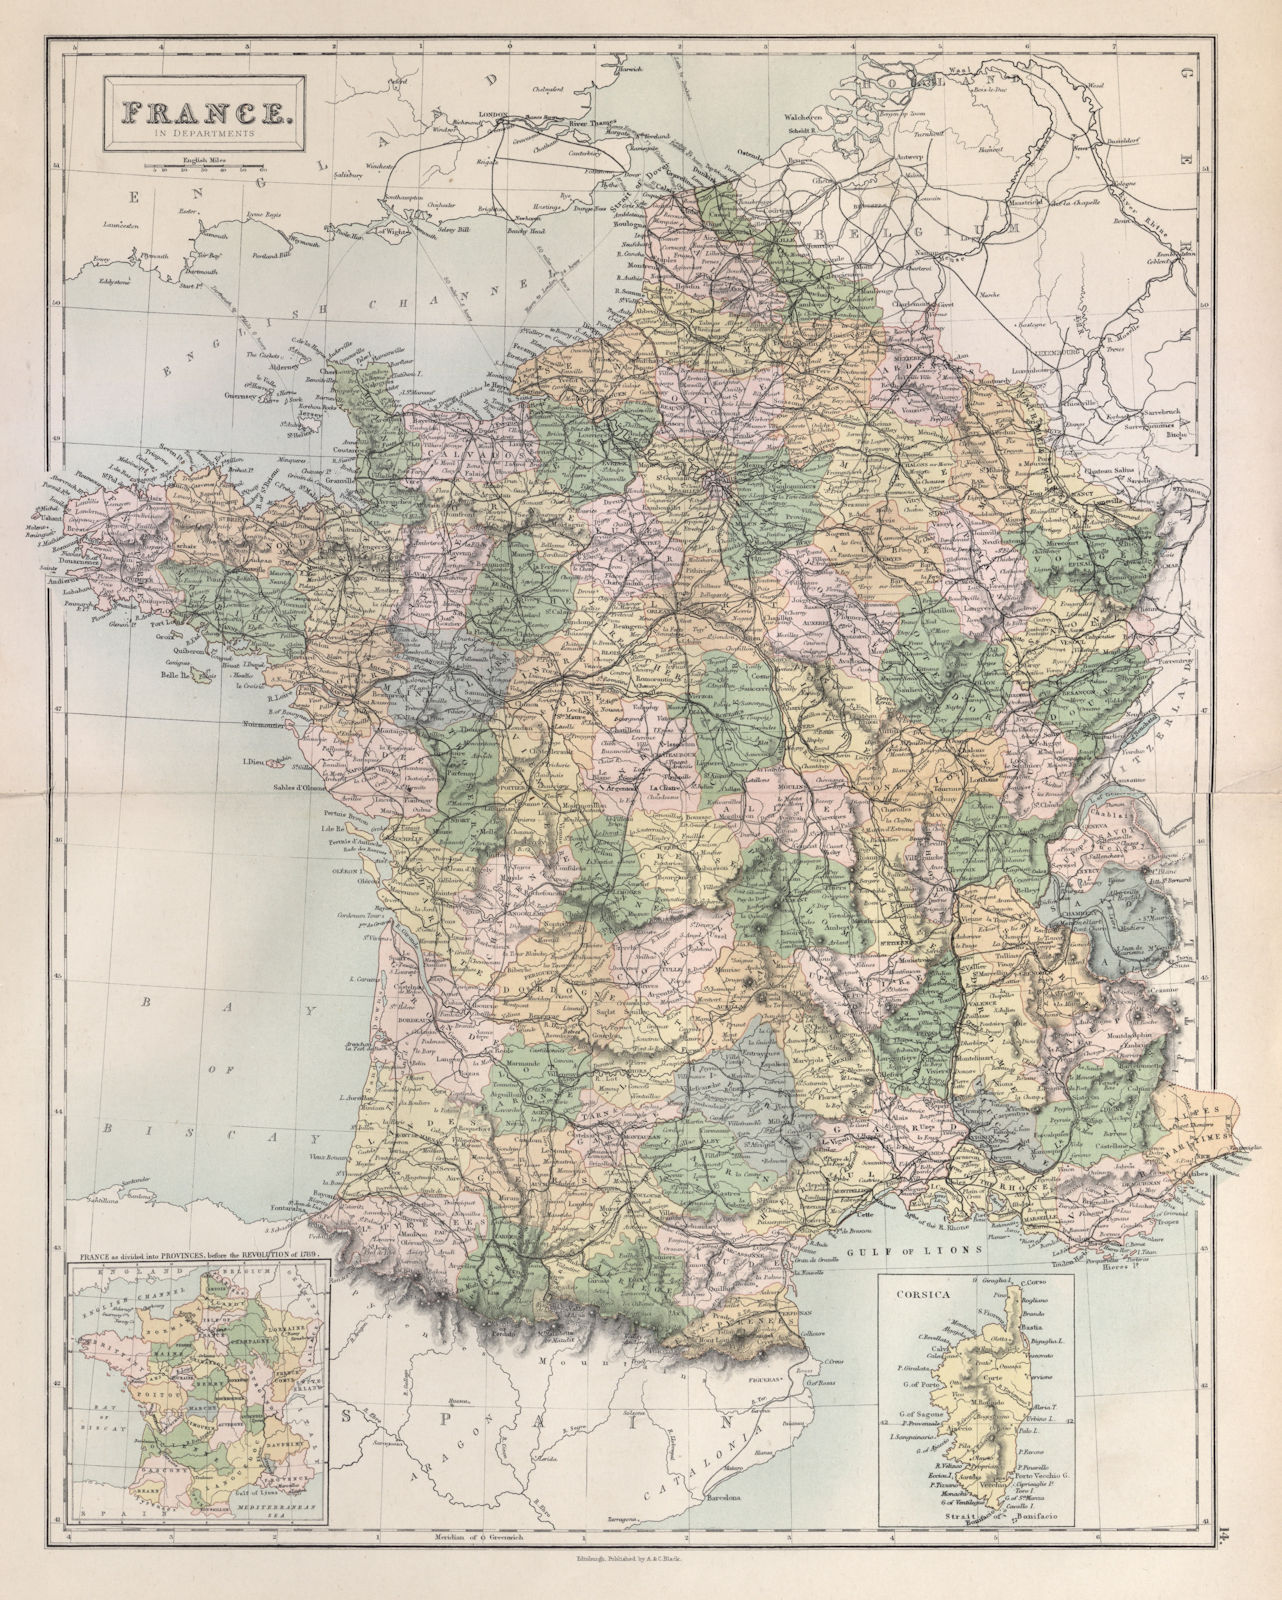 Associate Product France without Alsace Lorraine. Departements. BARTHOLOMEW 1882 old antique map